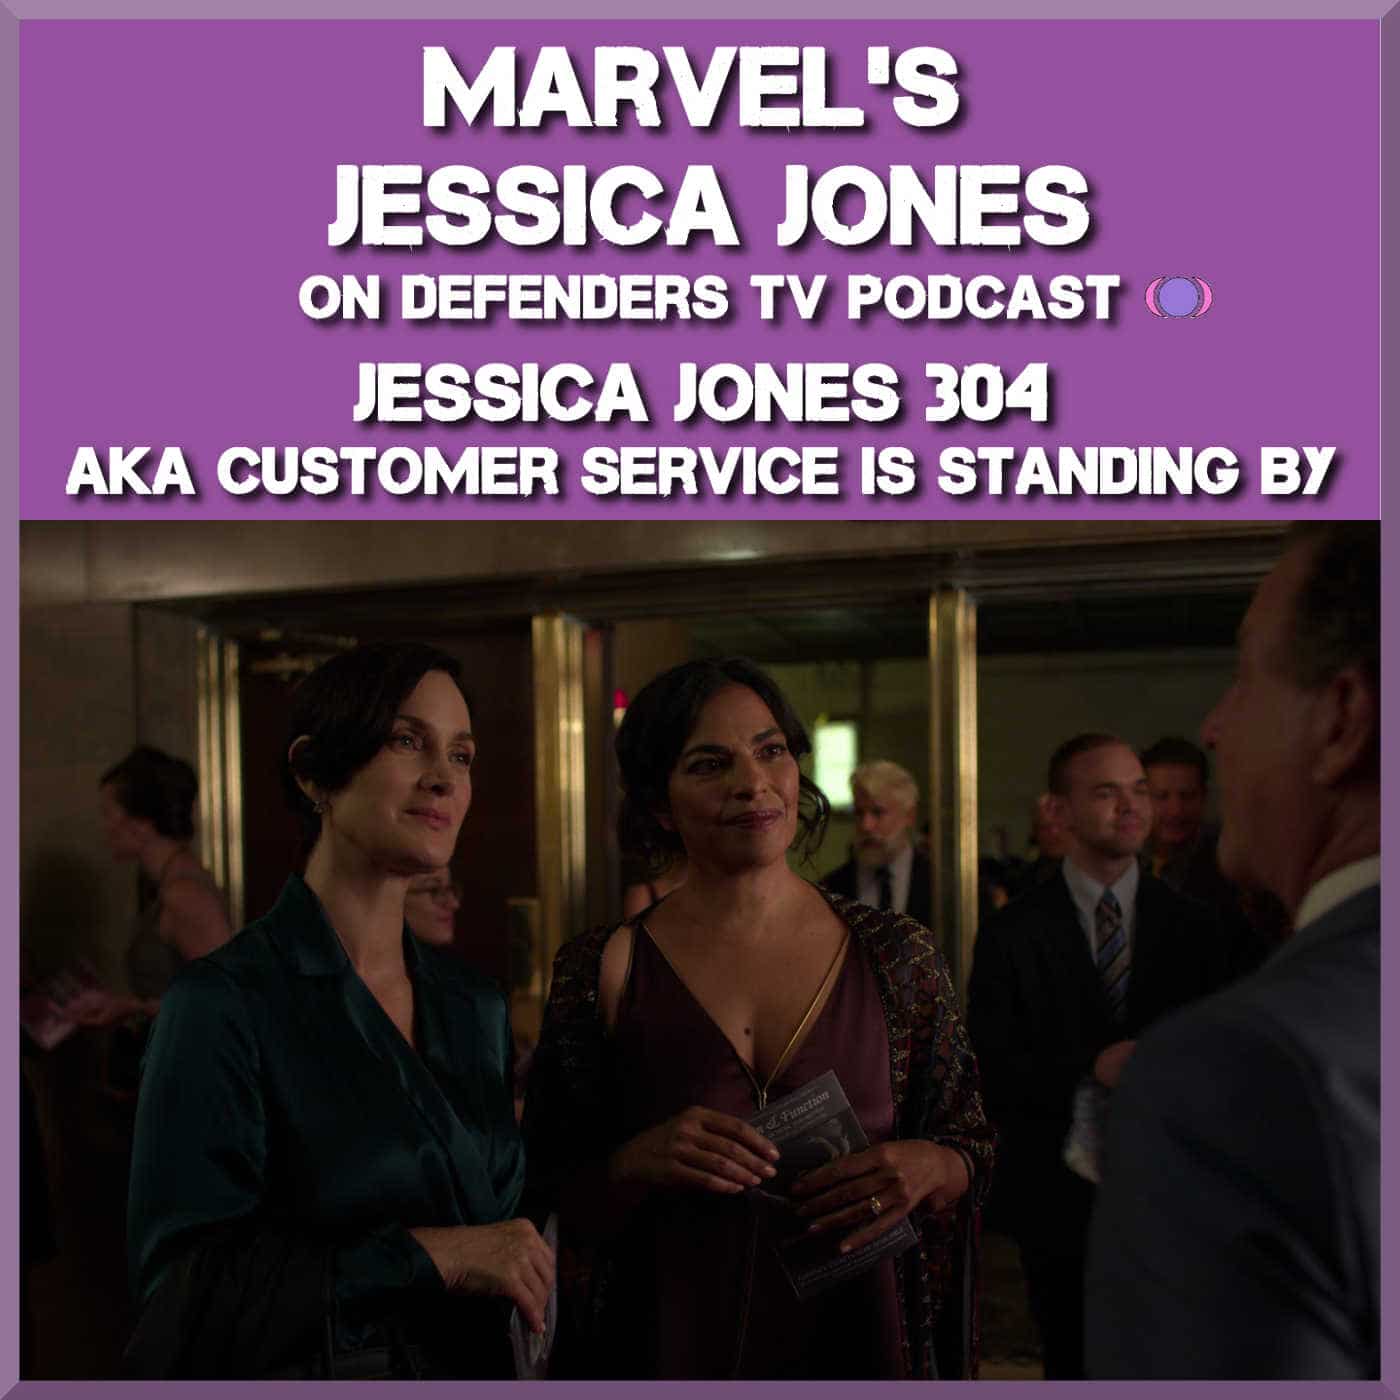 Jessica Jones 304 Review of “AKA Customer Service Is Standing By” by TV Podcast Industries